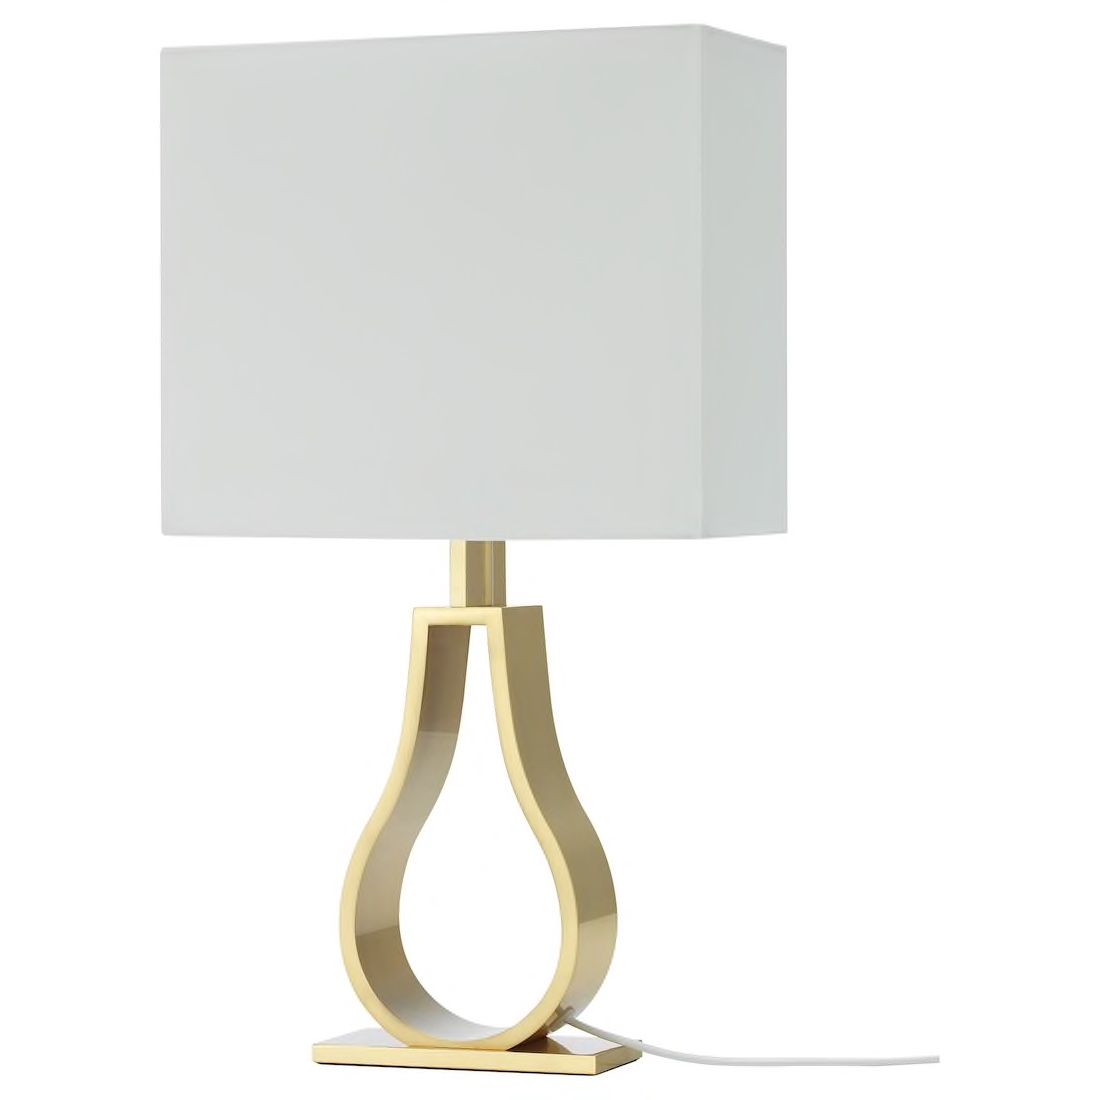 IKEA Klabb Table lamp with LED bulb, off white, brass color